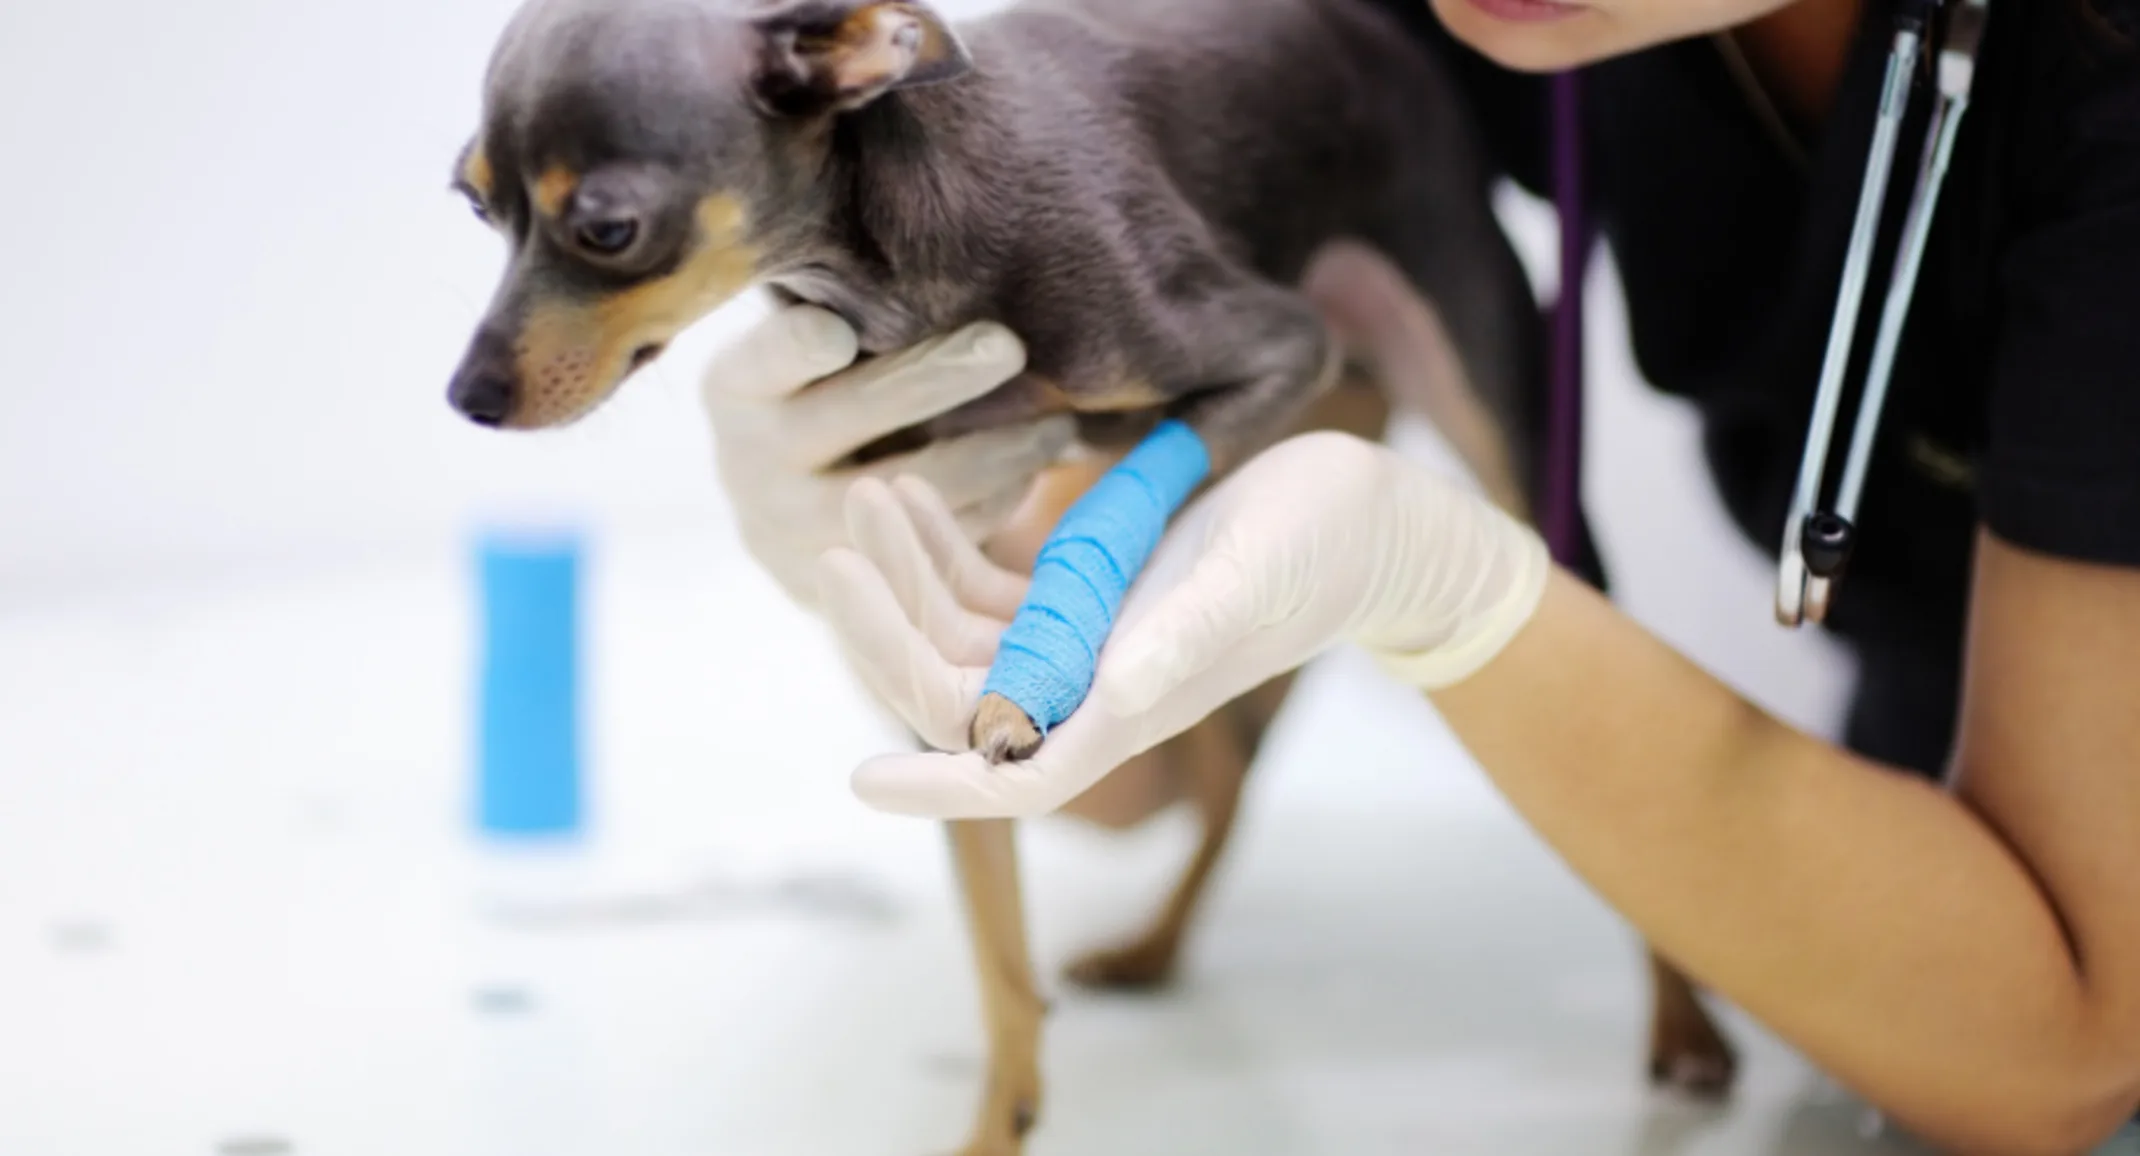 Veterinarian Helping a Dog with an Injured Leg